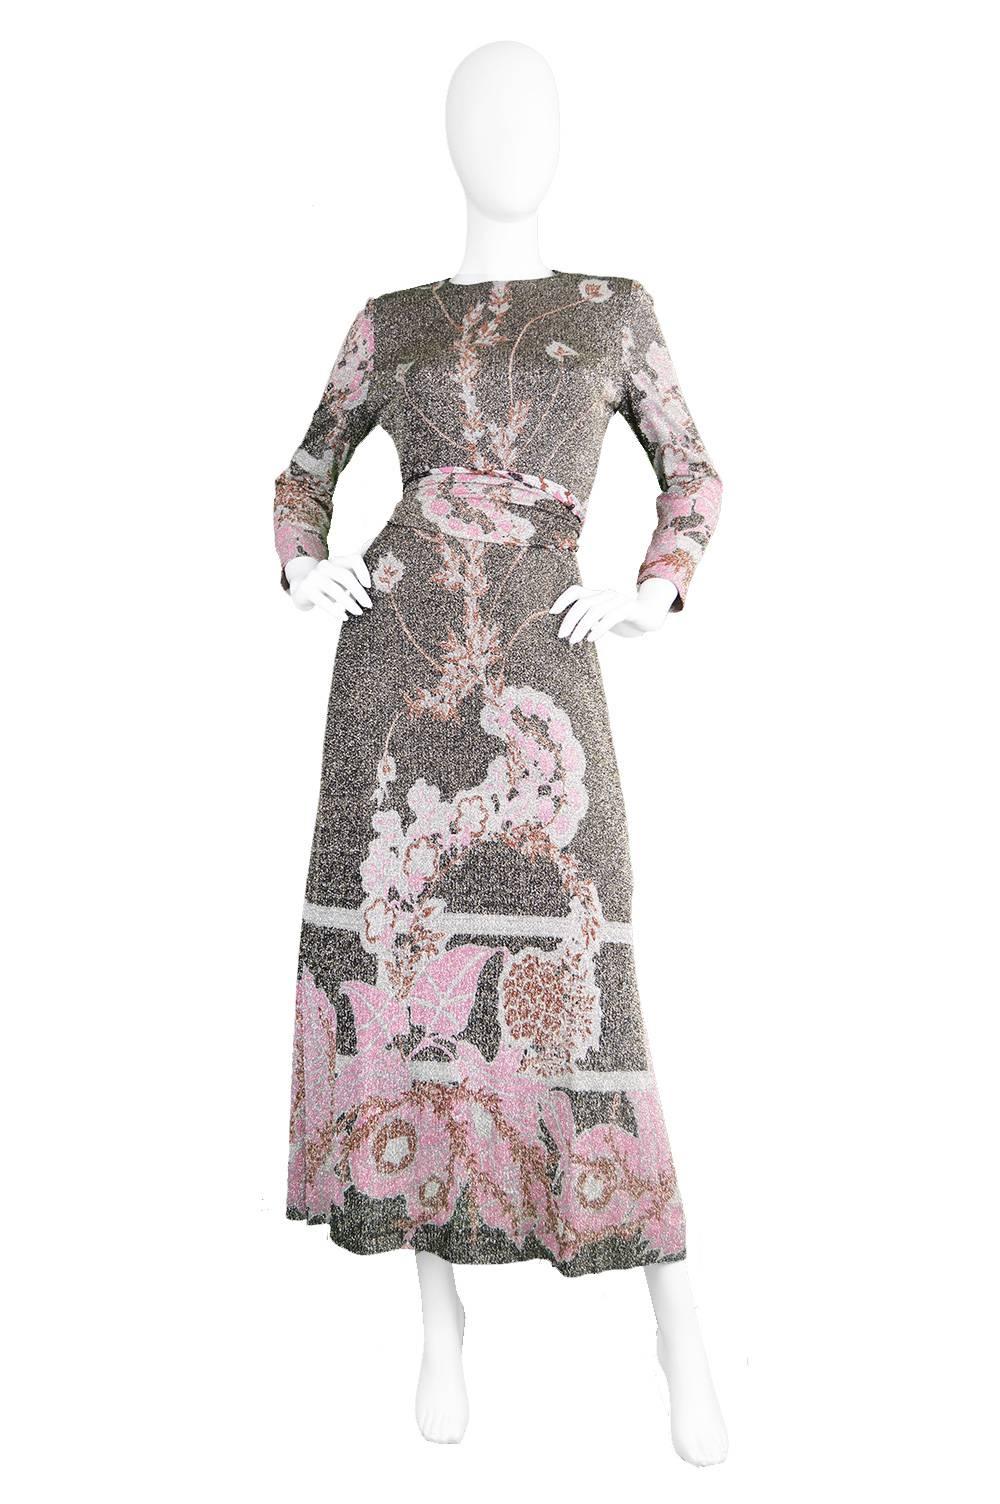 An incredibly elegant vintage maxi dress from the early 1970s by legendary French designer, Pierre Cardin for his high quality Jersey Couture line. In a slinky floral-printed jersey with gold lurex throughout, this glamorous dress is sure to be